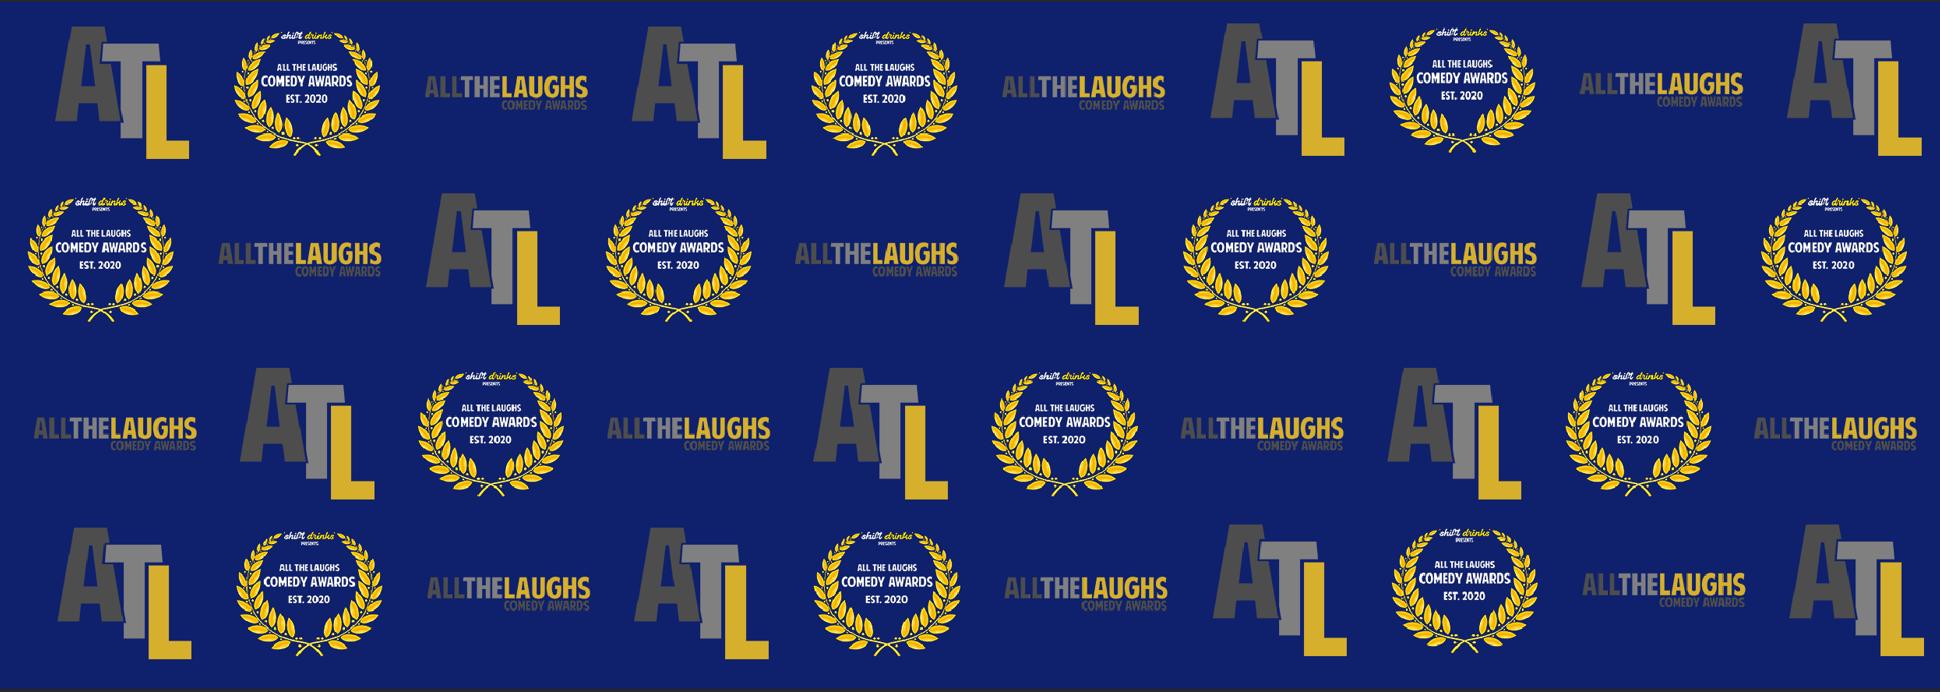 All The Laughs (ATL) Comedy Awards 2023